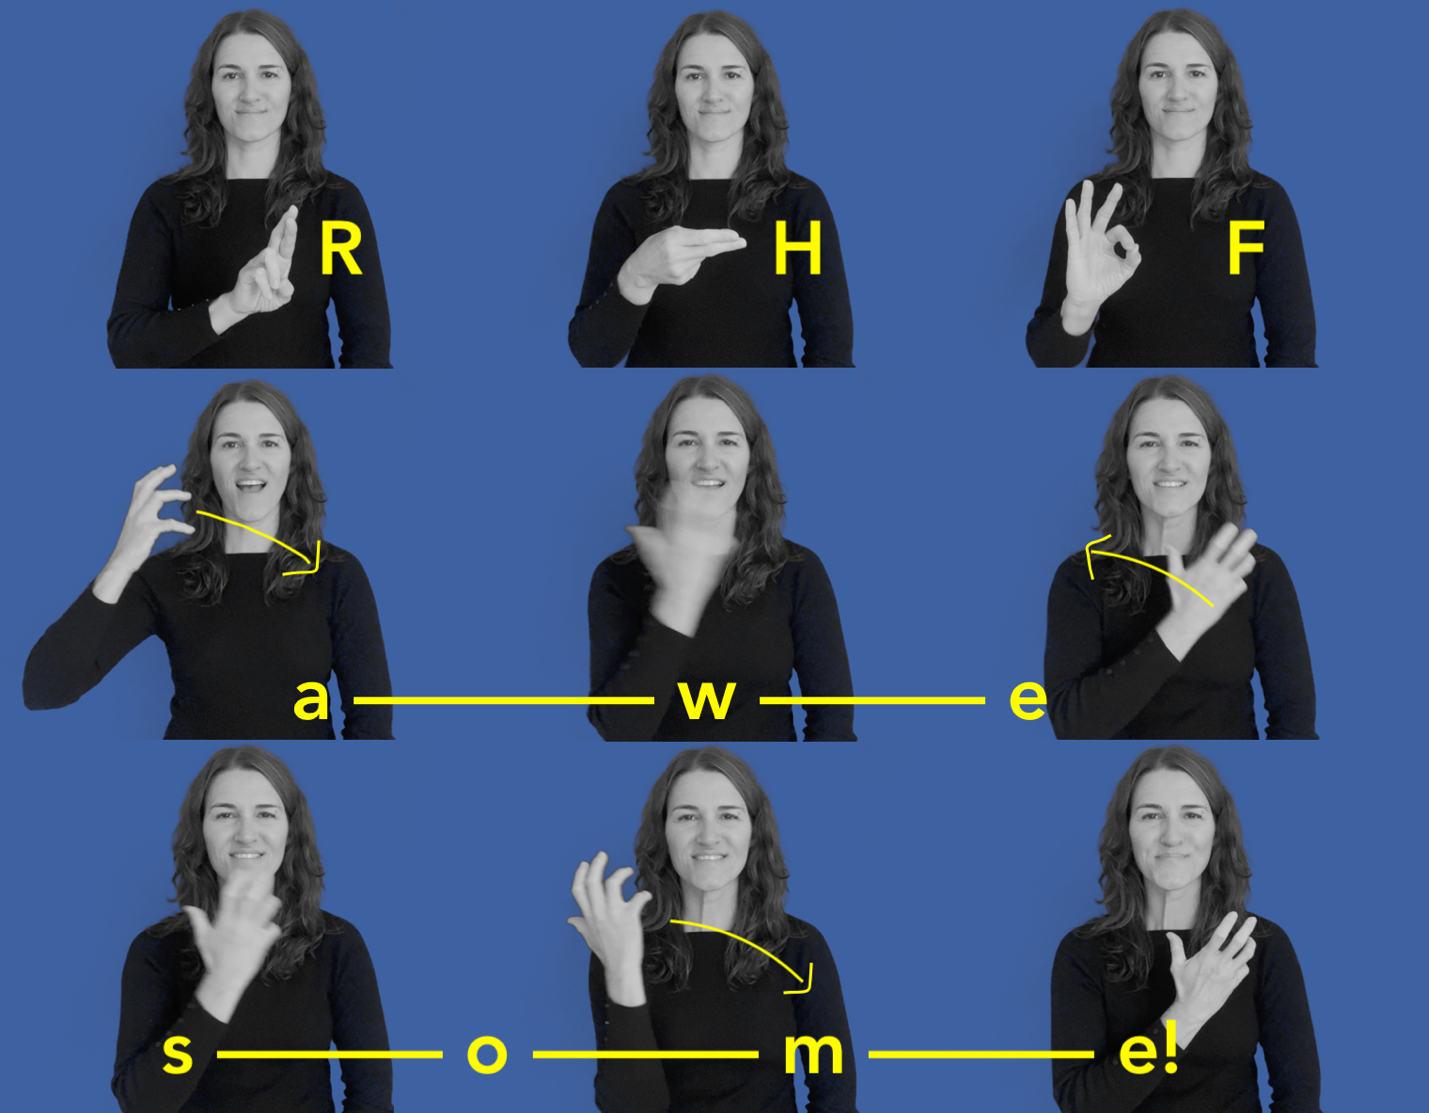 RHF is Awesome  Close up of a sign language interpreter with long hair demonstrates with her two hands and body language how to sign the words "RHF is Awesome" in four steps.